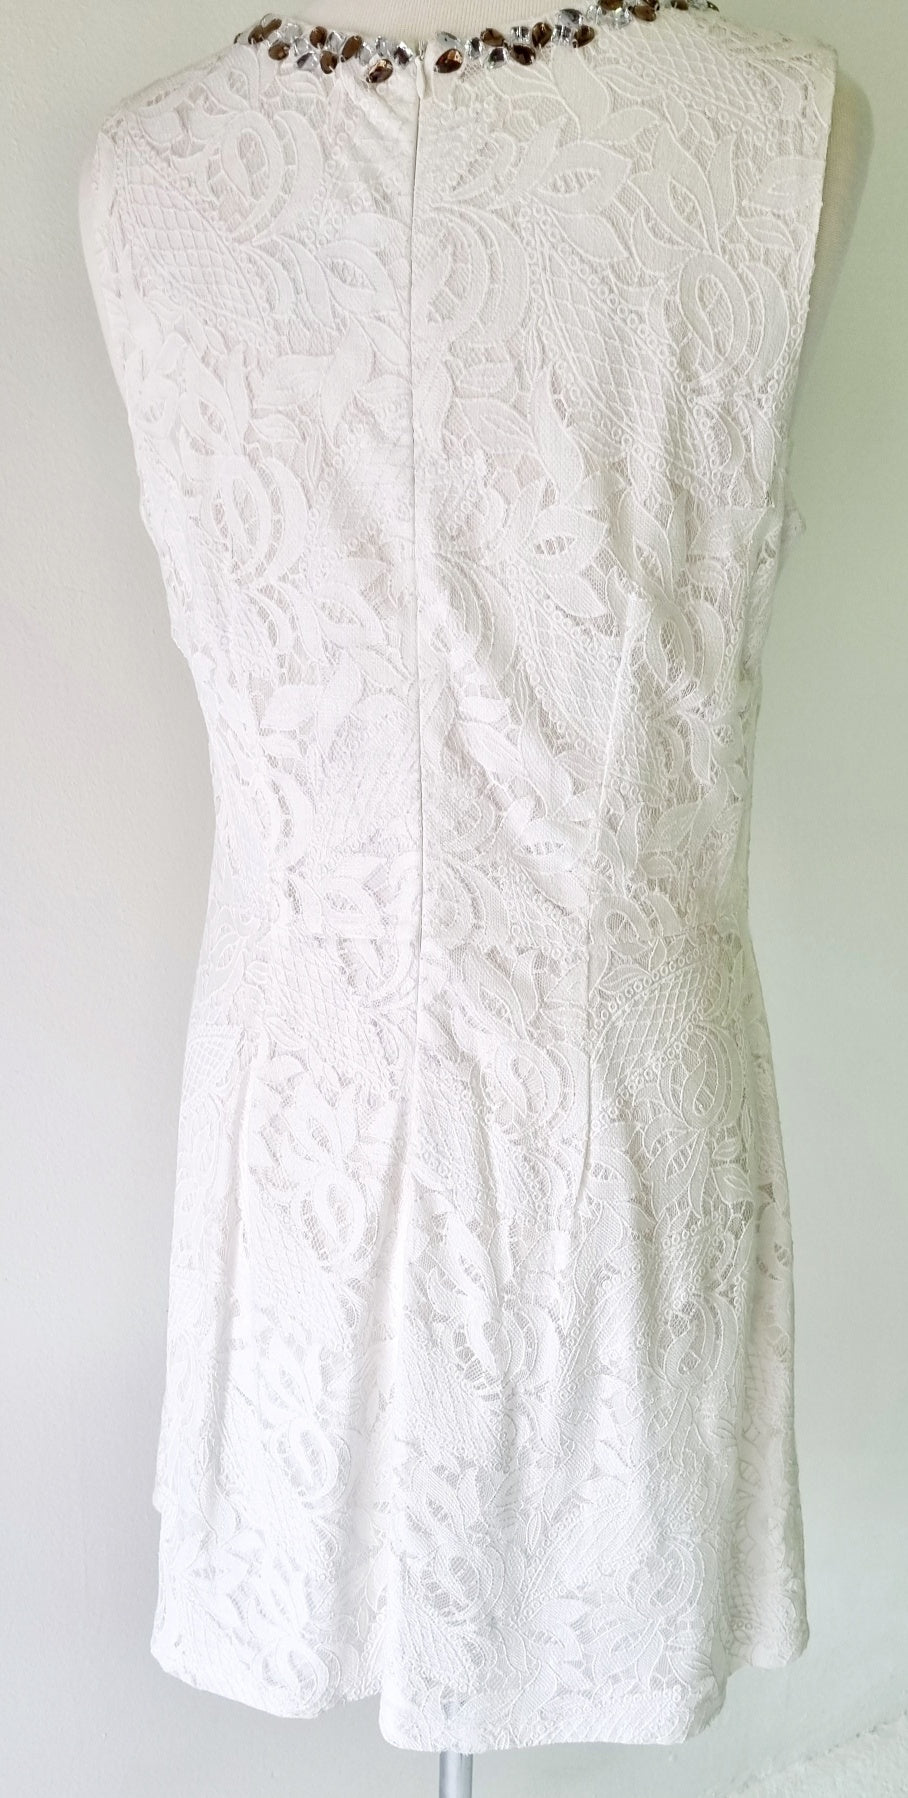 Woolworths - Off White lined midi dress with stone embellished neckline